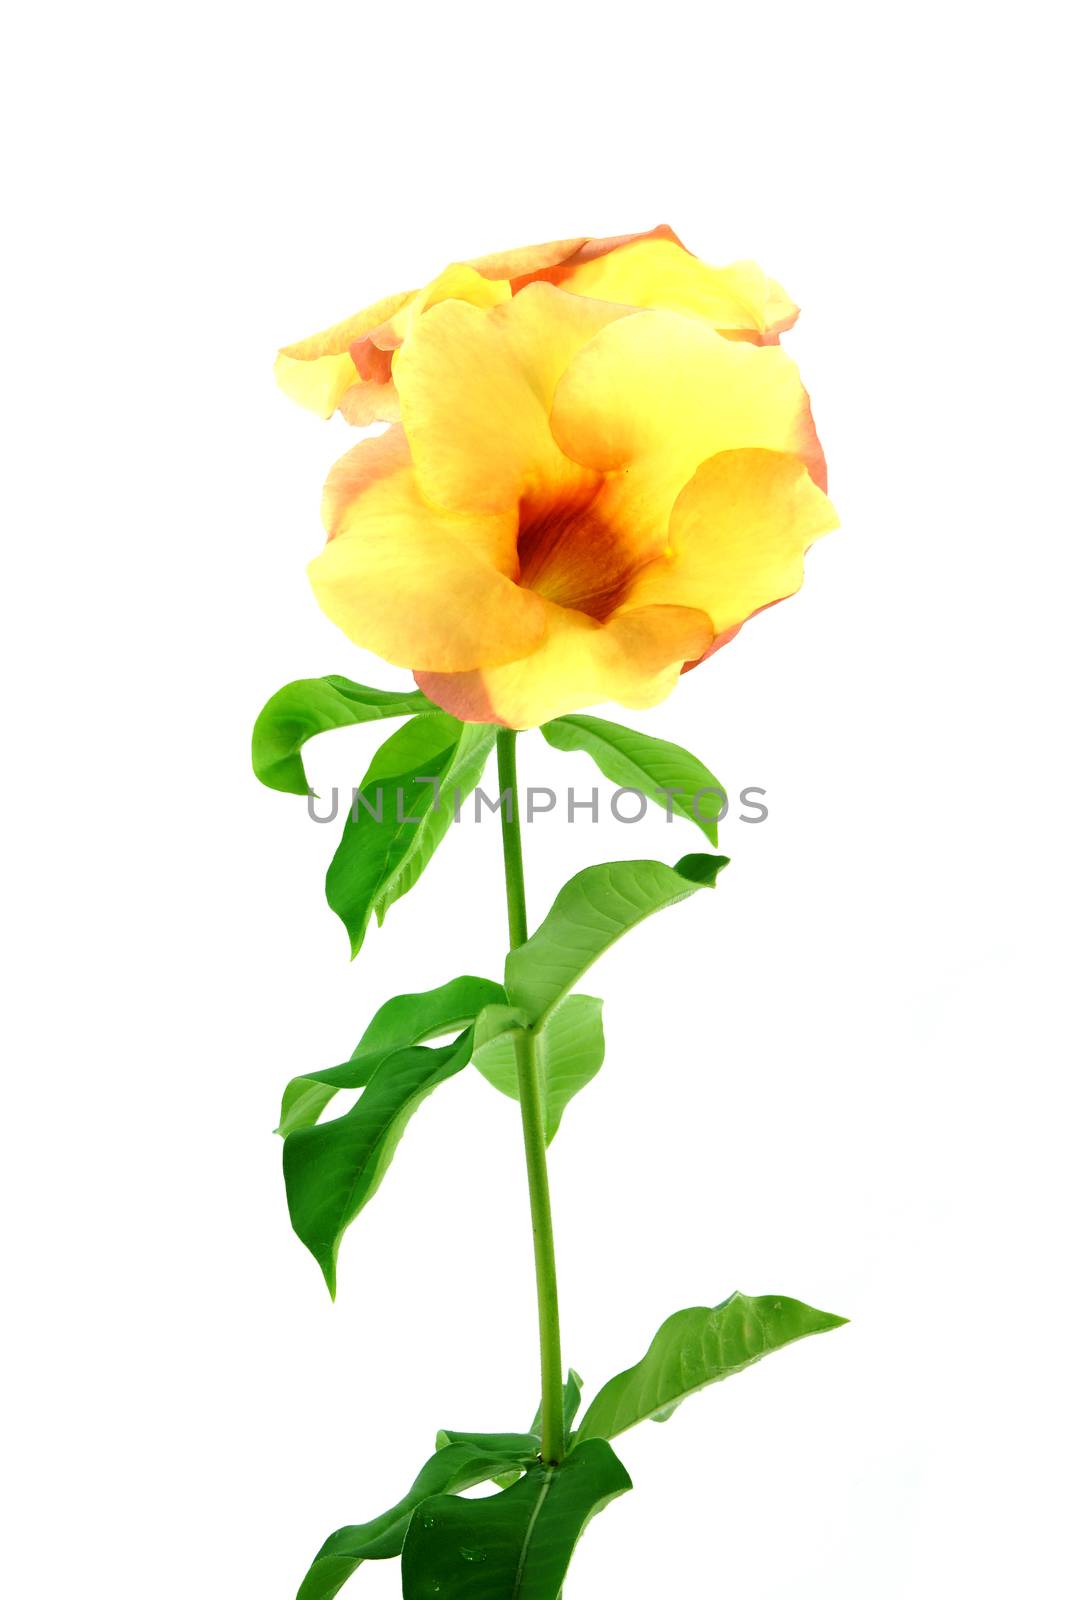 Allamanda or golden trumpet , beautiful yellow flower isolated o by Noppharat_th